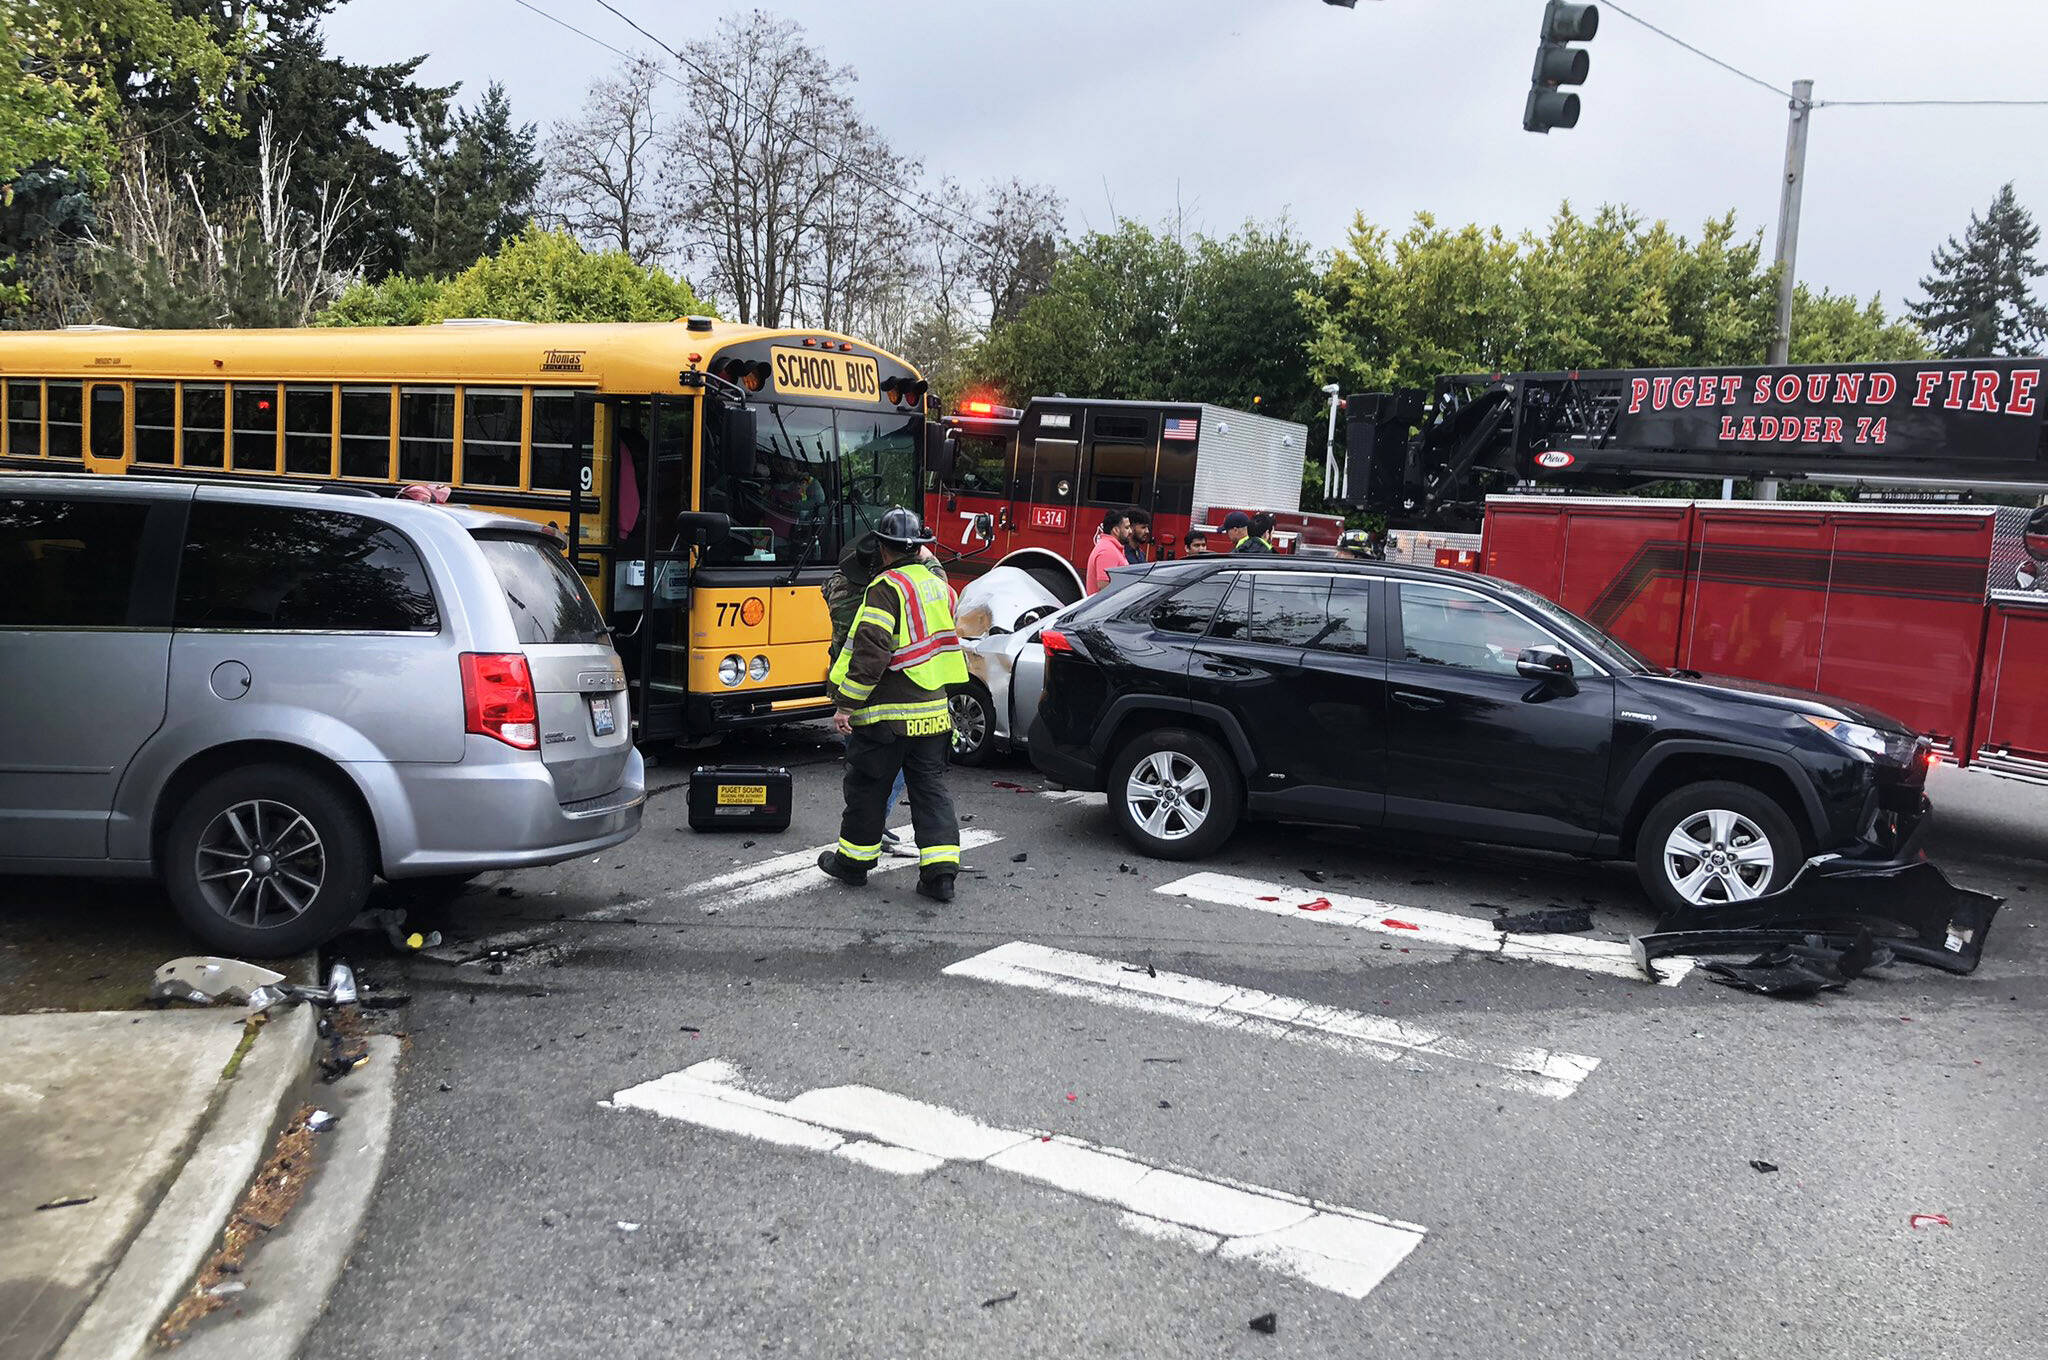 School bus, 3 other vehicles involved in Kent crash | Update